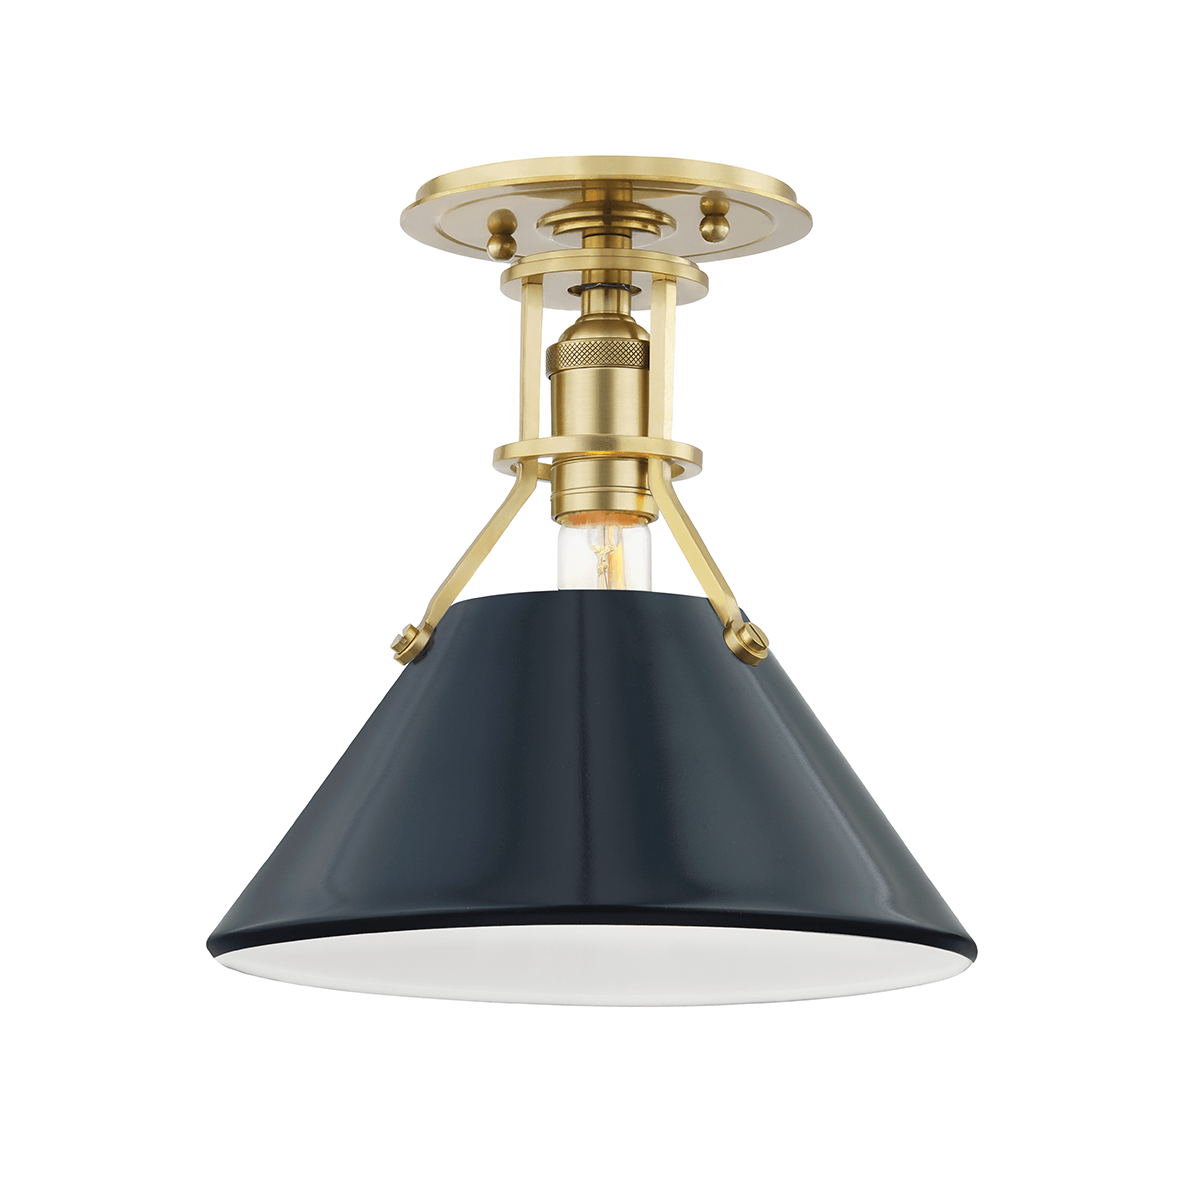 Hudson Valley Lighting - Painted No.2 Semi Flush Mount - MDS353-AGB/DBL | Montreal Lighting & Hardware